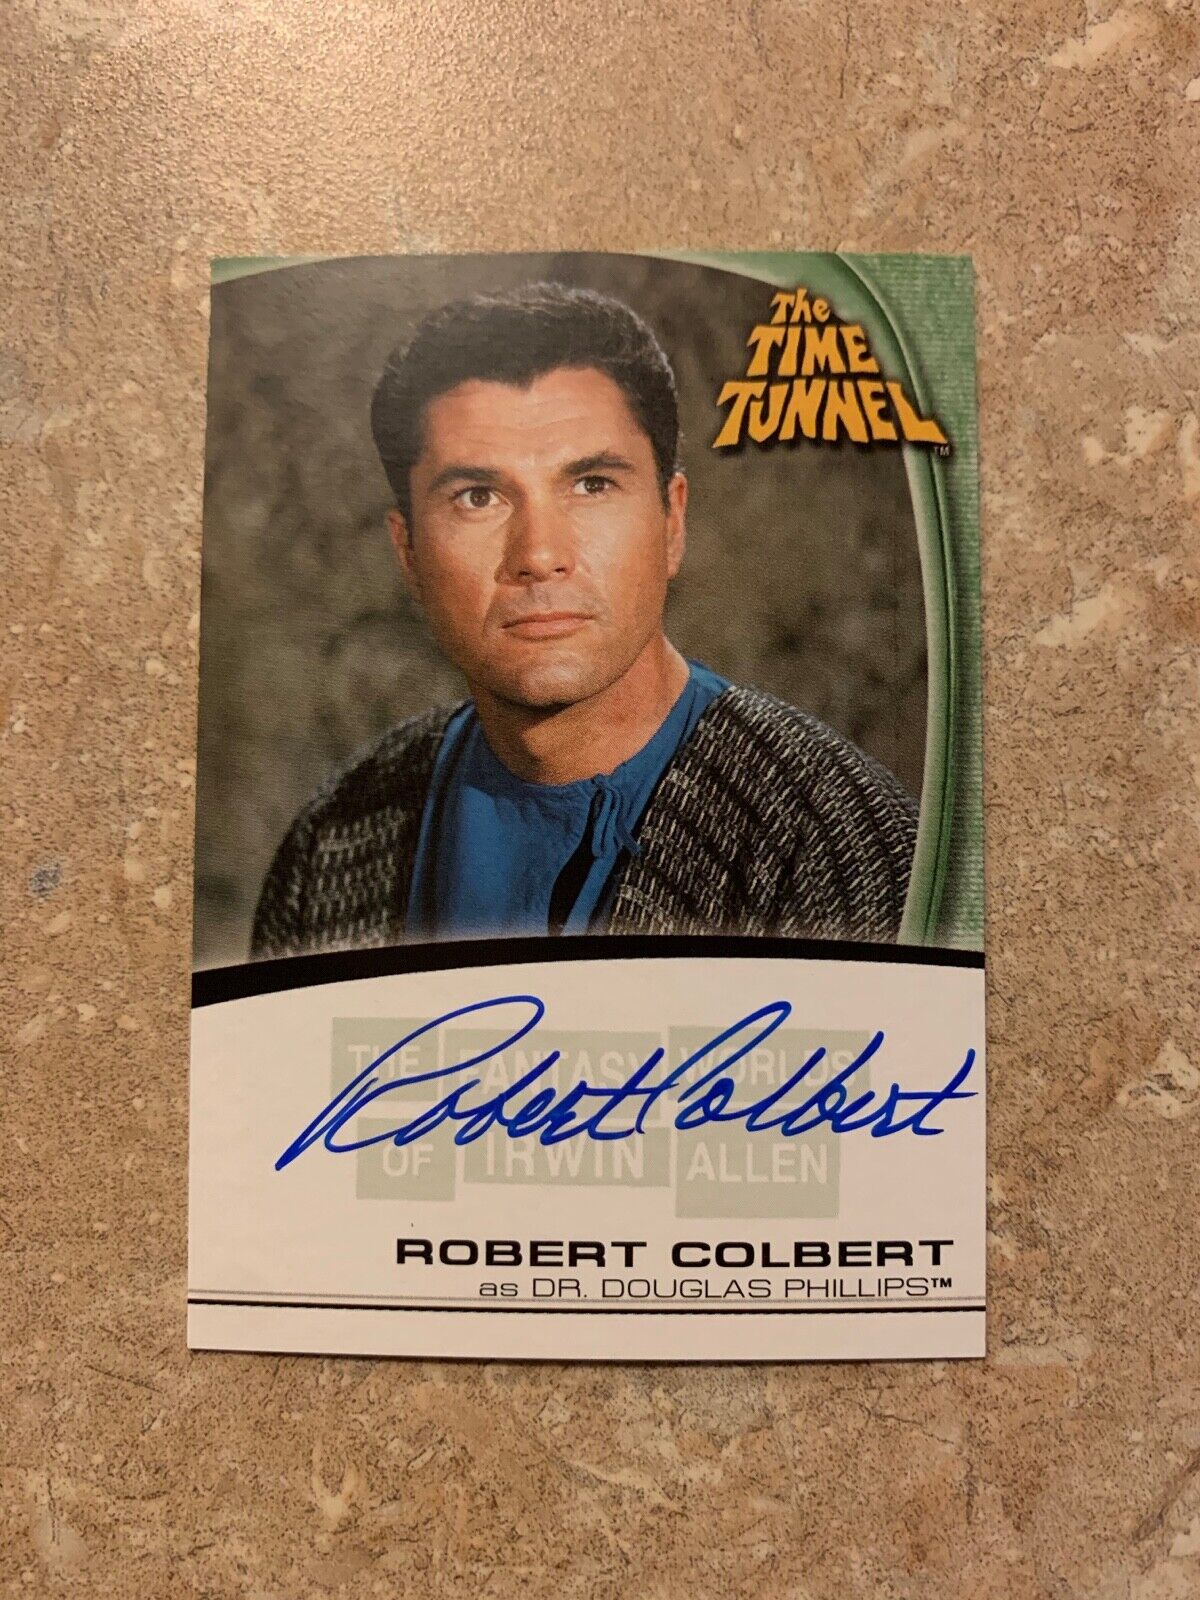 Robert Colbert Time Tunnel Limited Edition Autographed Card Iwrin Allen A8